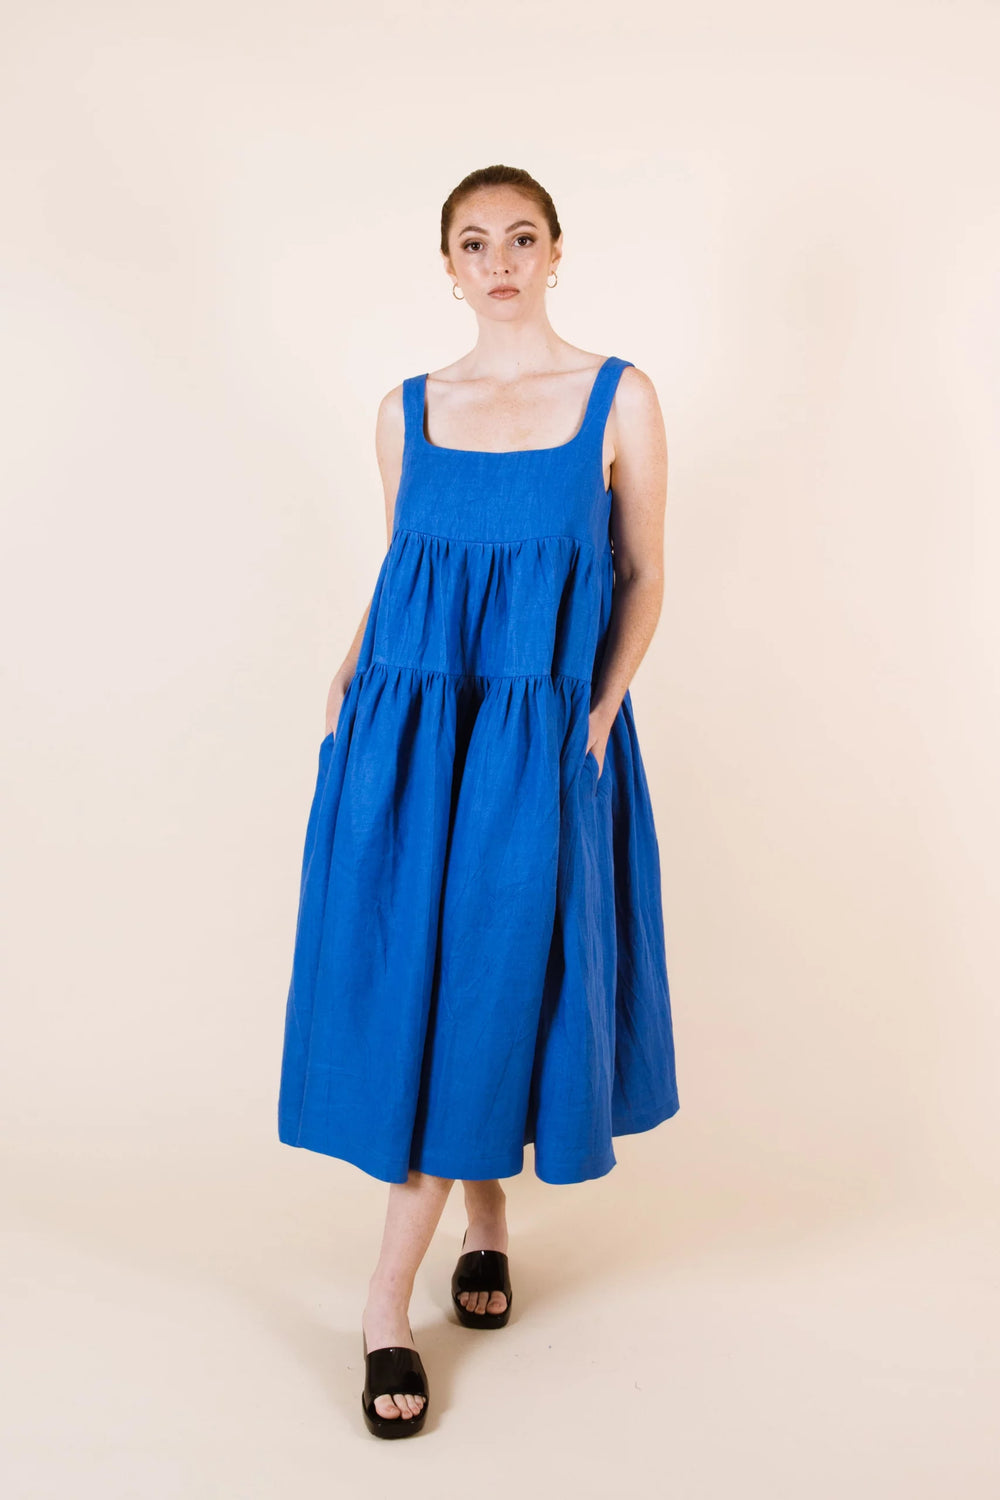 Women wearing the Celestia Dress sewing pattern from Papercut Patterns on The Fold Line. A sun dress pattern made in cotton, linen or rayon fabrics, featuring three tiers of voluminous fabric, midi length, in-seam pockets, square neckline and shoulder str